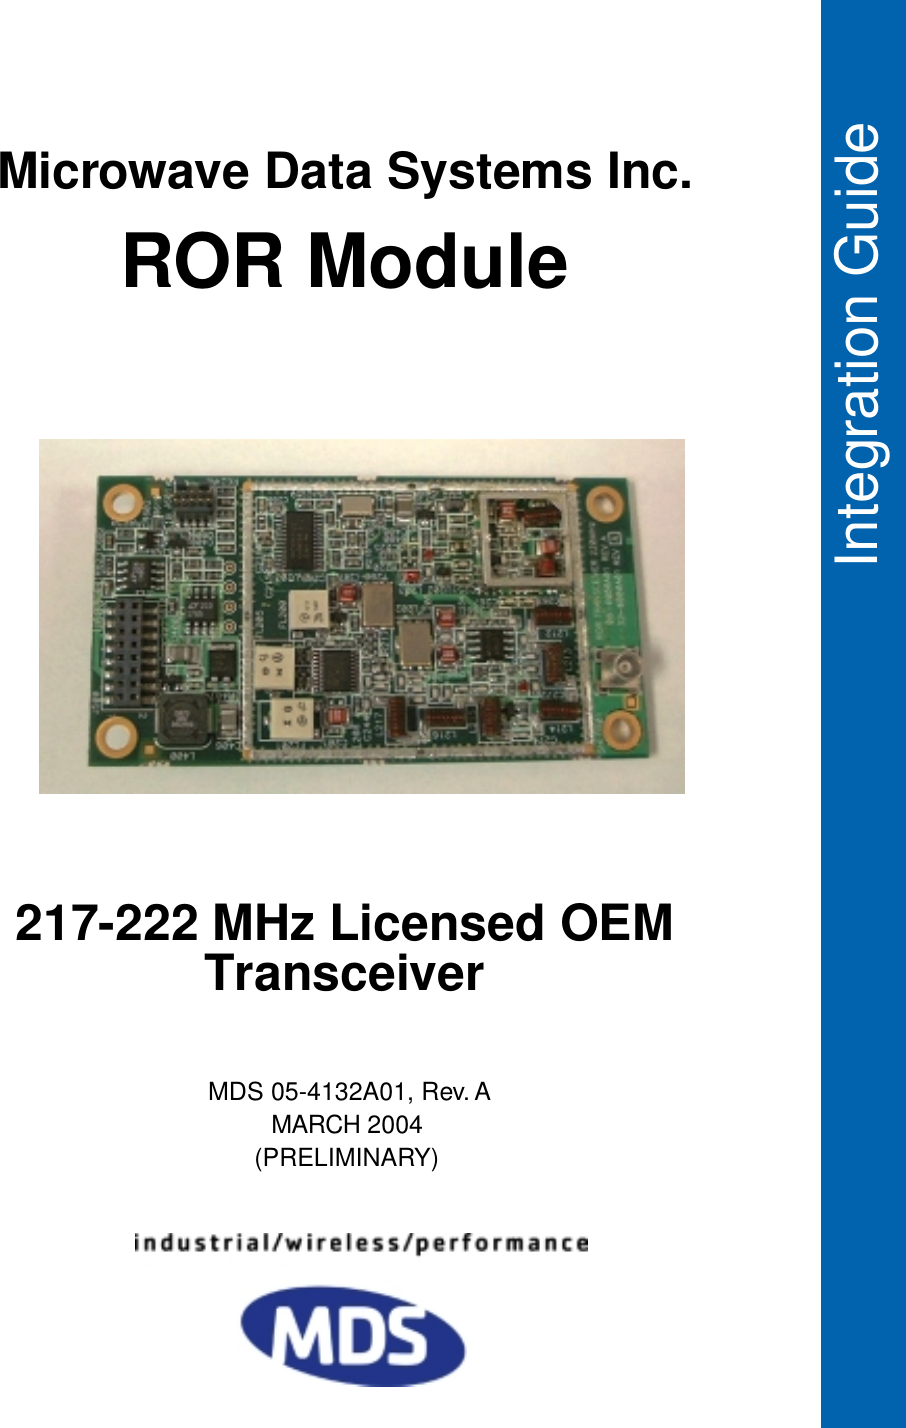  Integration Guide217-222 MHz Licensed OEM TransceiverROR ModuleMicrowave Data Systems Inc.   MDS 05-4132A01, Rev. A  MARCH 2004(PRELIMINARY)